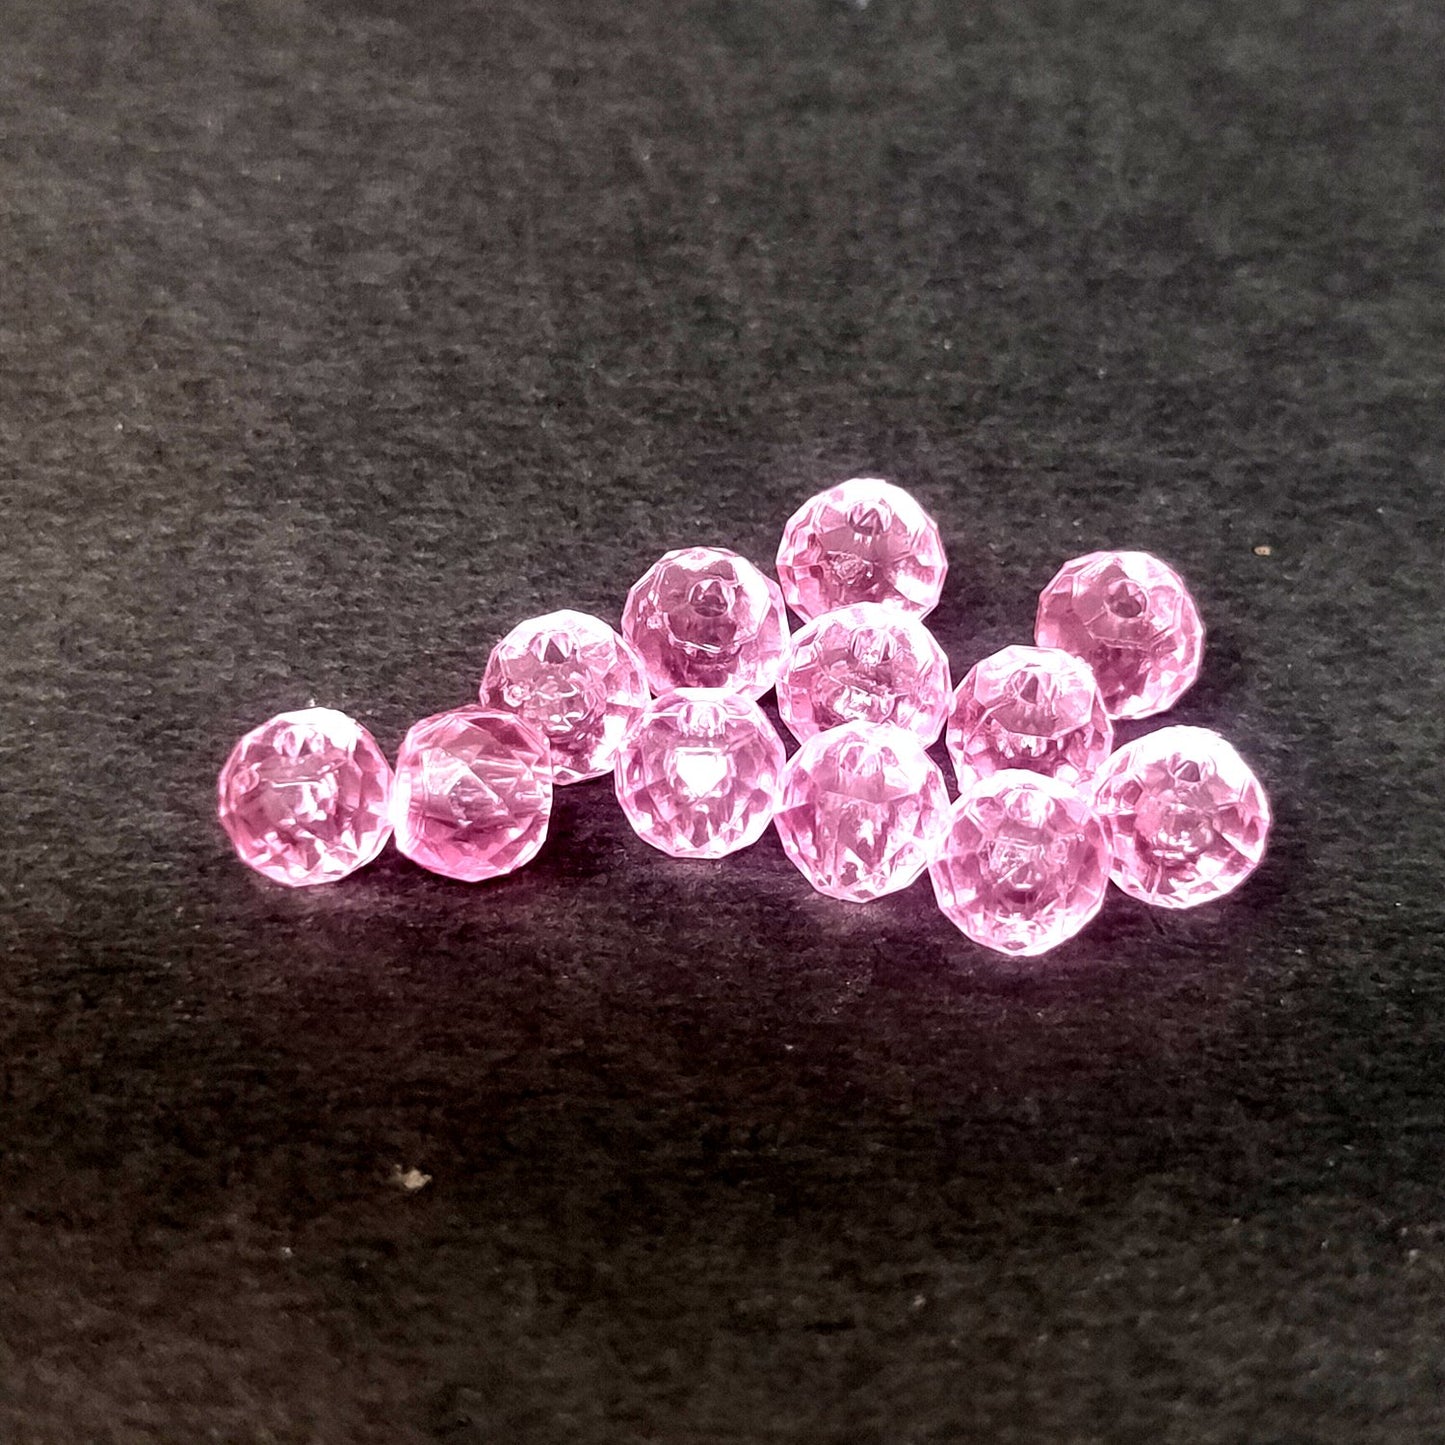 8 mm Translucent Crystal Beads for Jewellery Making and Decoration (100 Beads) - 96-02